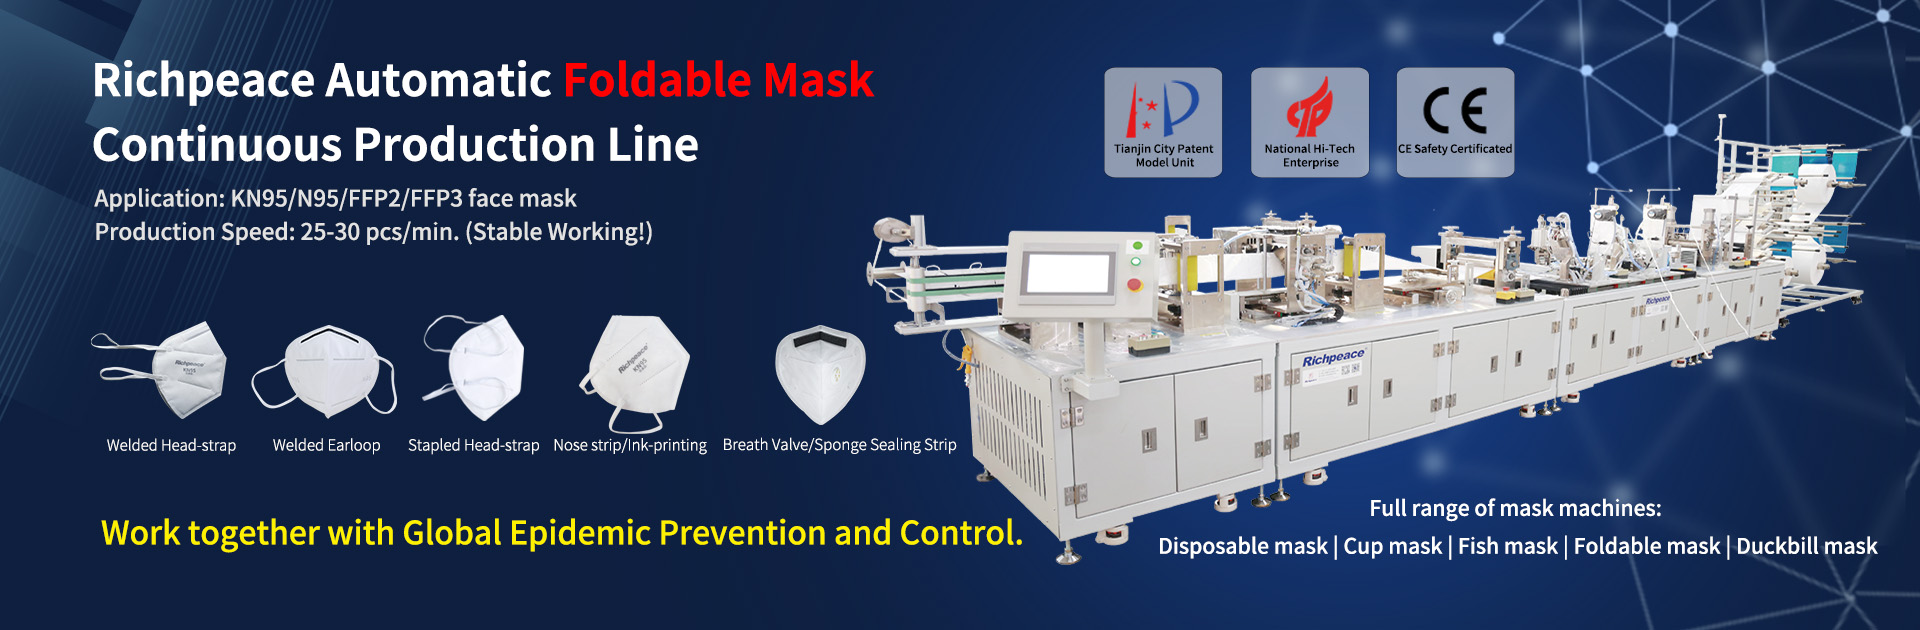 Richpeace Automatic Foldable Mask Continuous Production Line (Headband Welding)